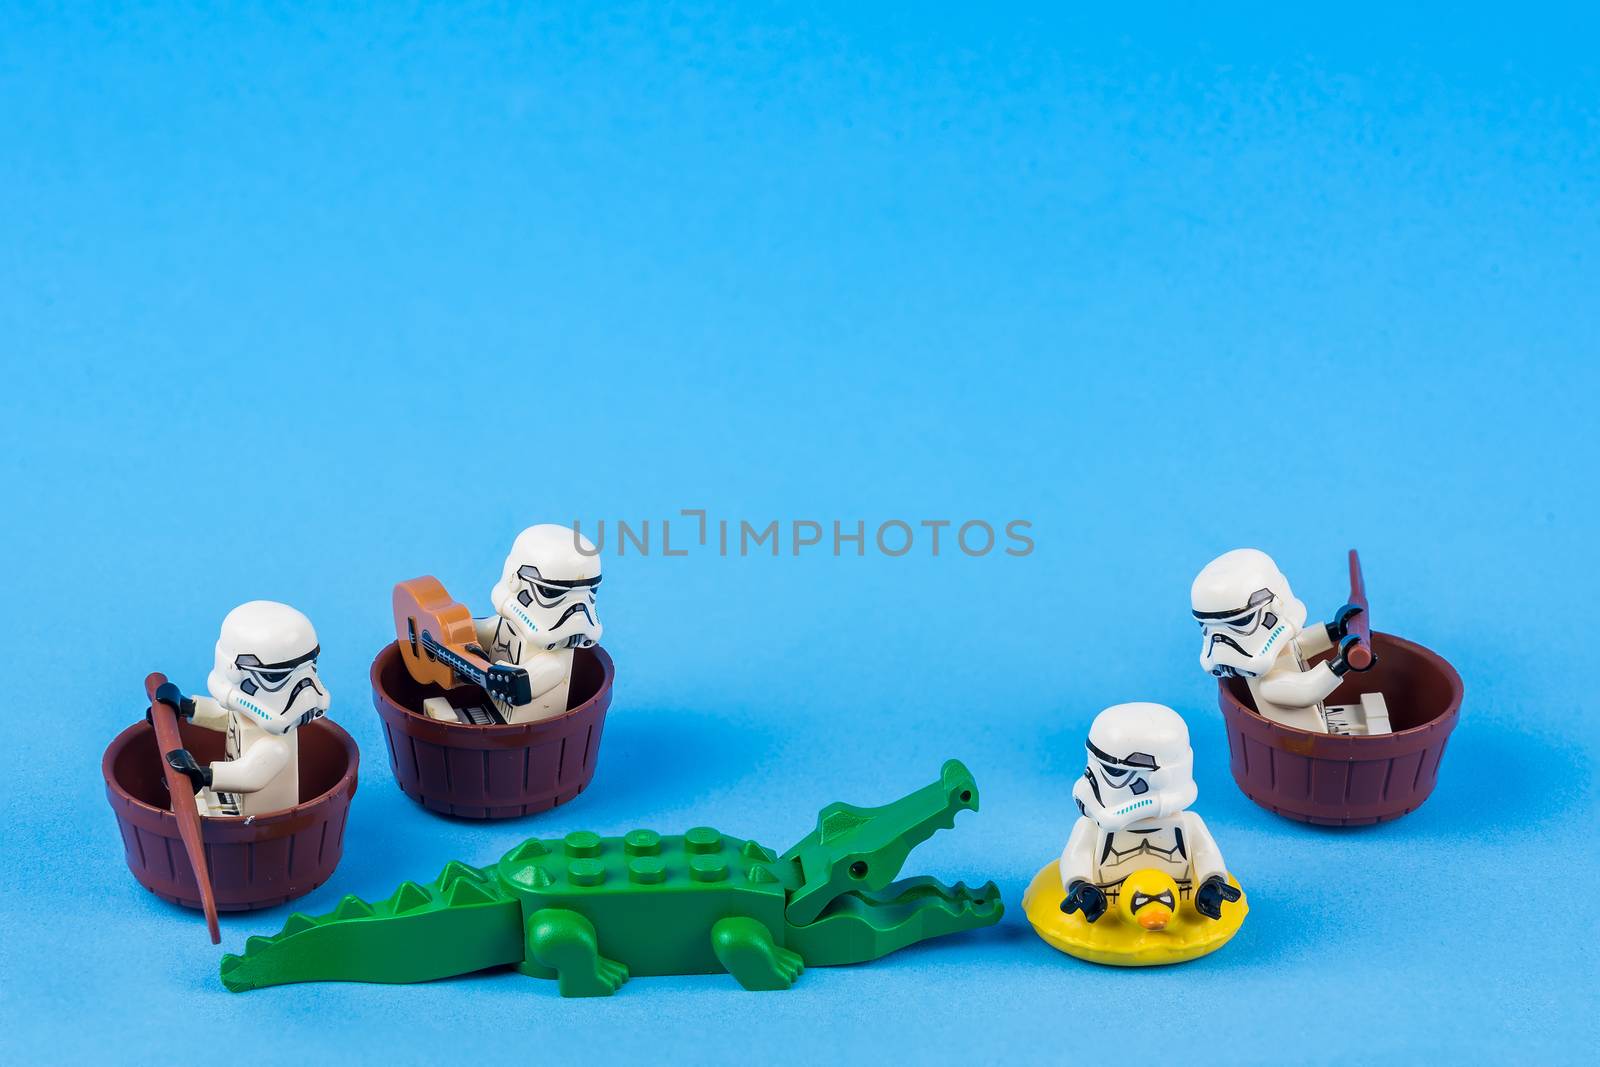 Bangkok, Thailand - June, 08, 2010 : Lego Star Wars is rowing away from the crocodiles On a blue background at Bangkok, Thailand. Fun concept